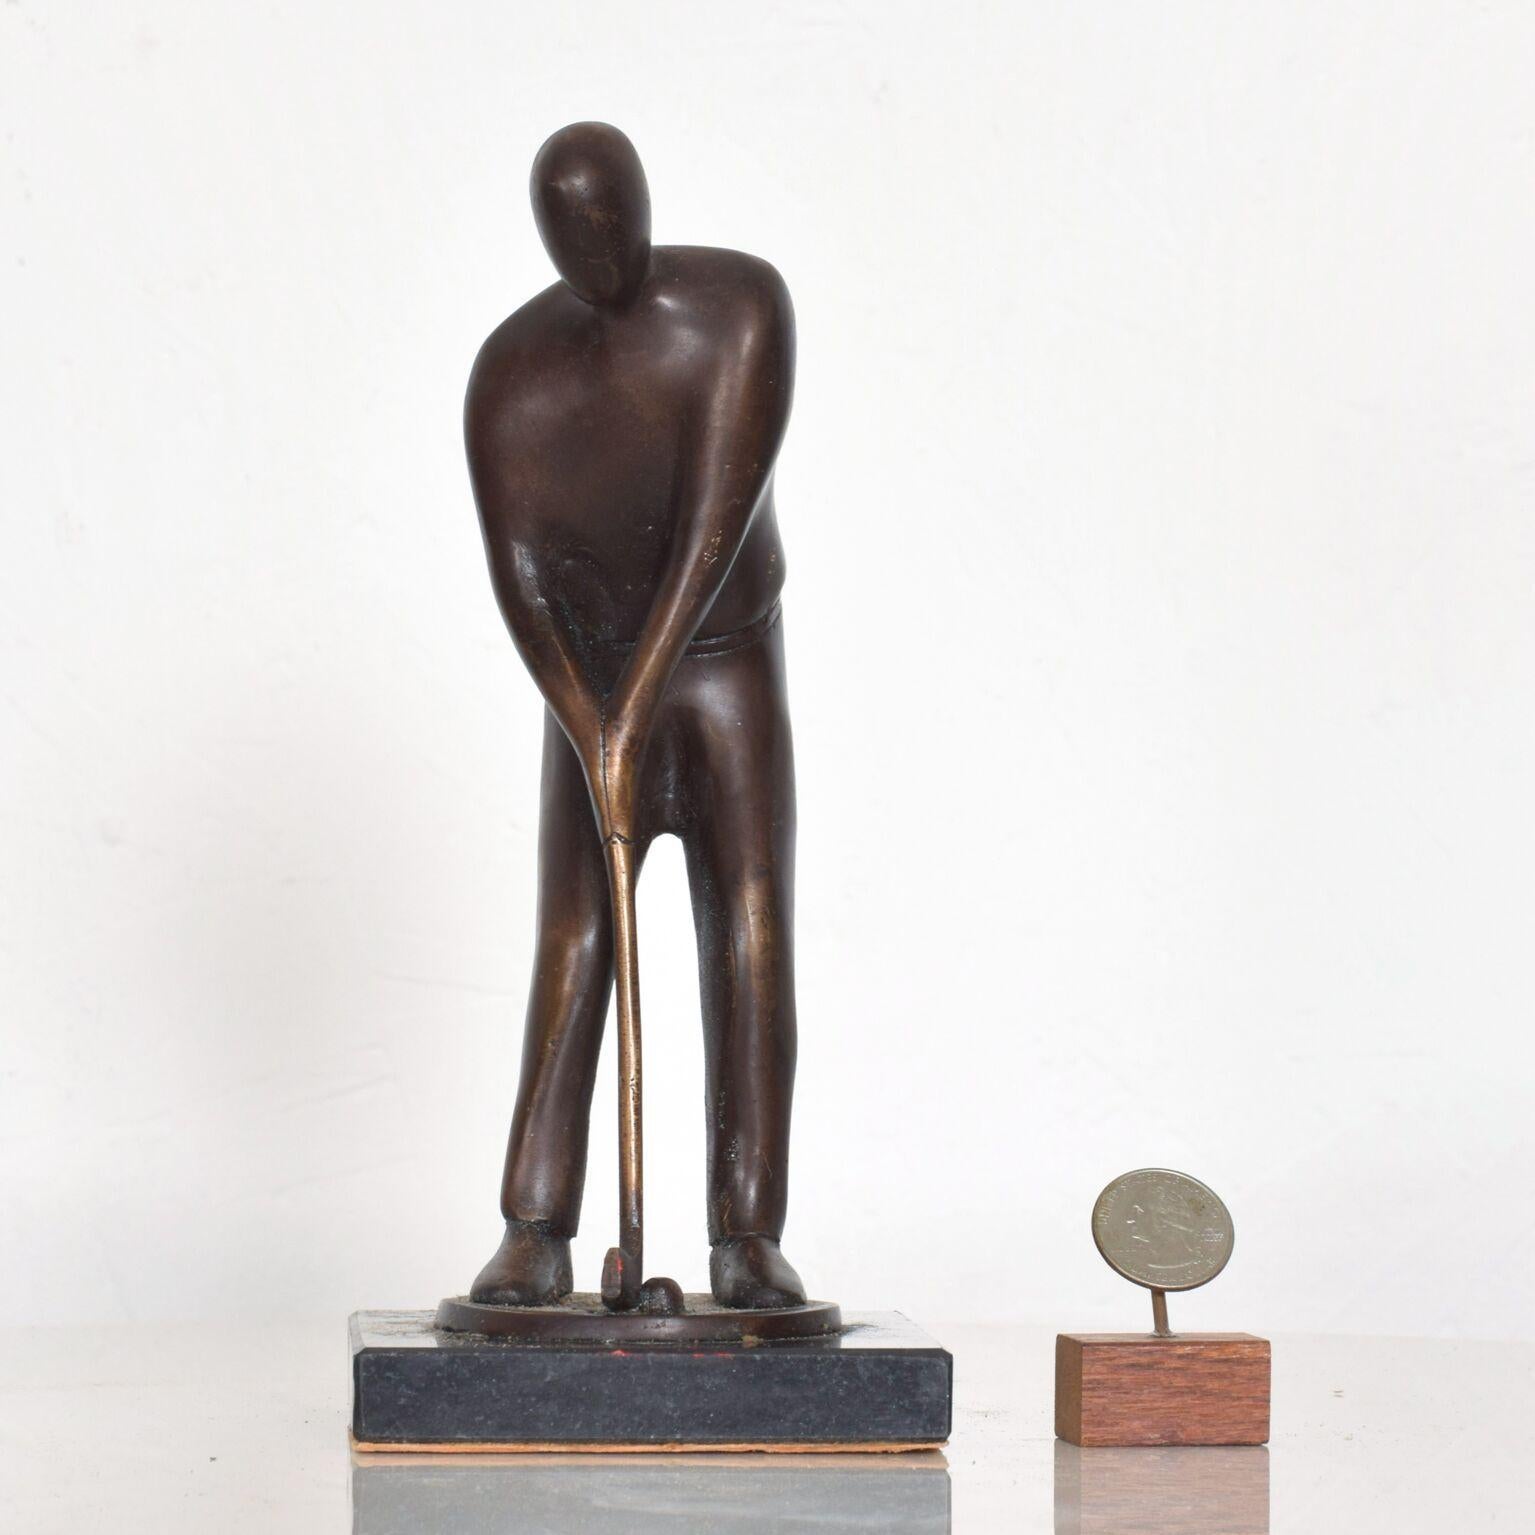 For your pleasure: Modern Art abstract bronze sculpture golfer statue

Fabulous faceless golf player lining up shot in swing form.

Dimensions: 8 1/2